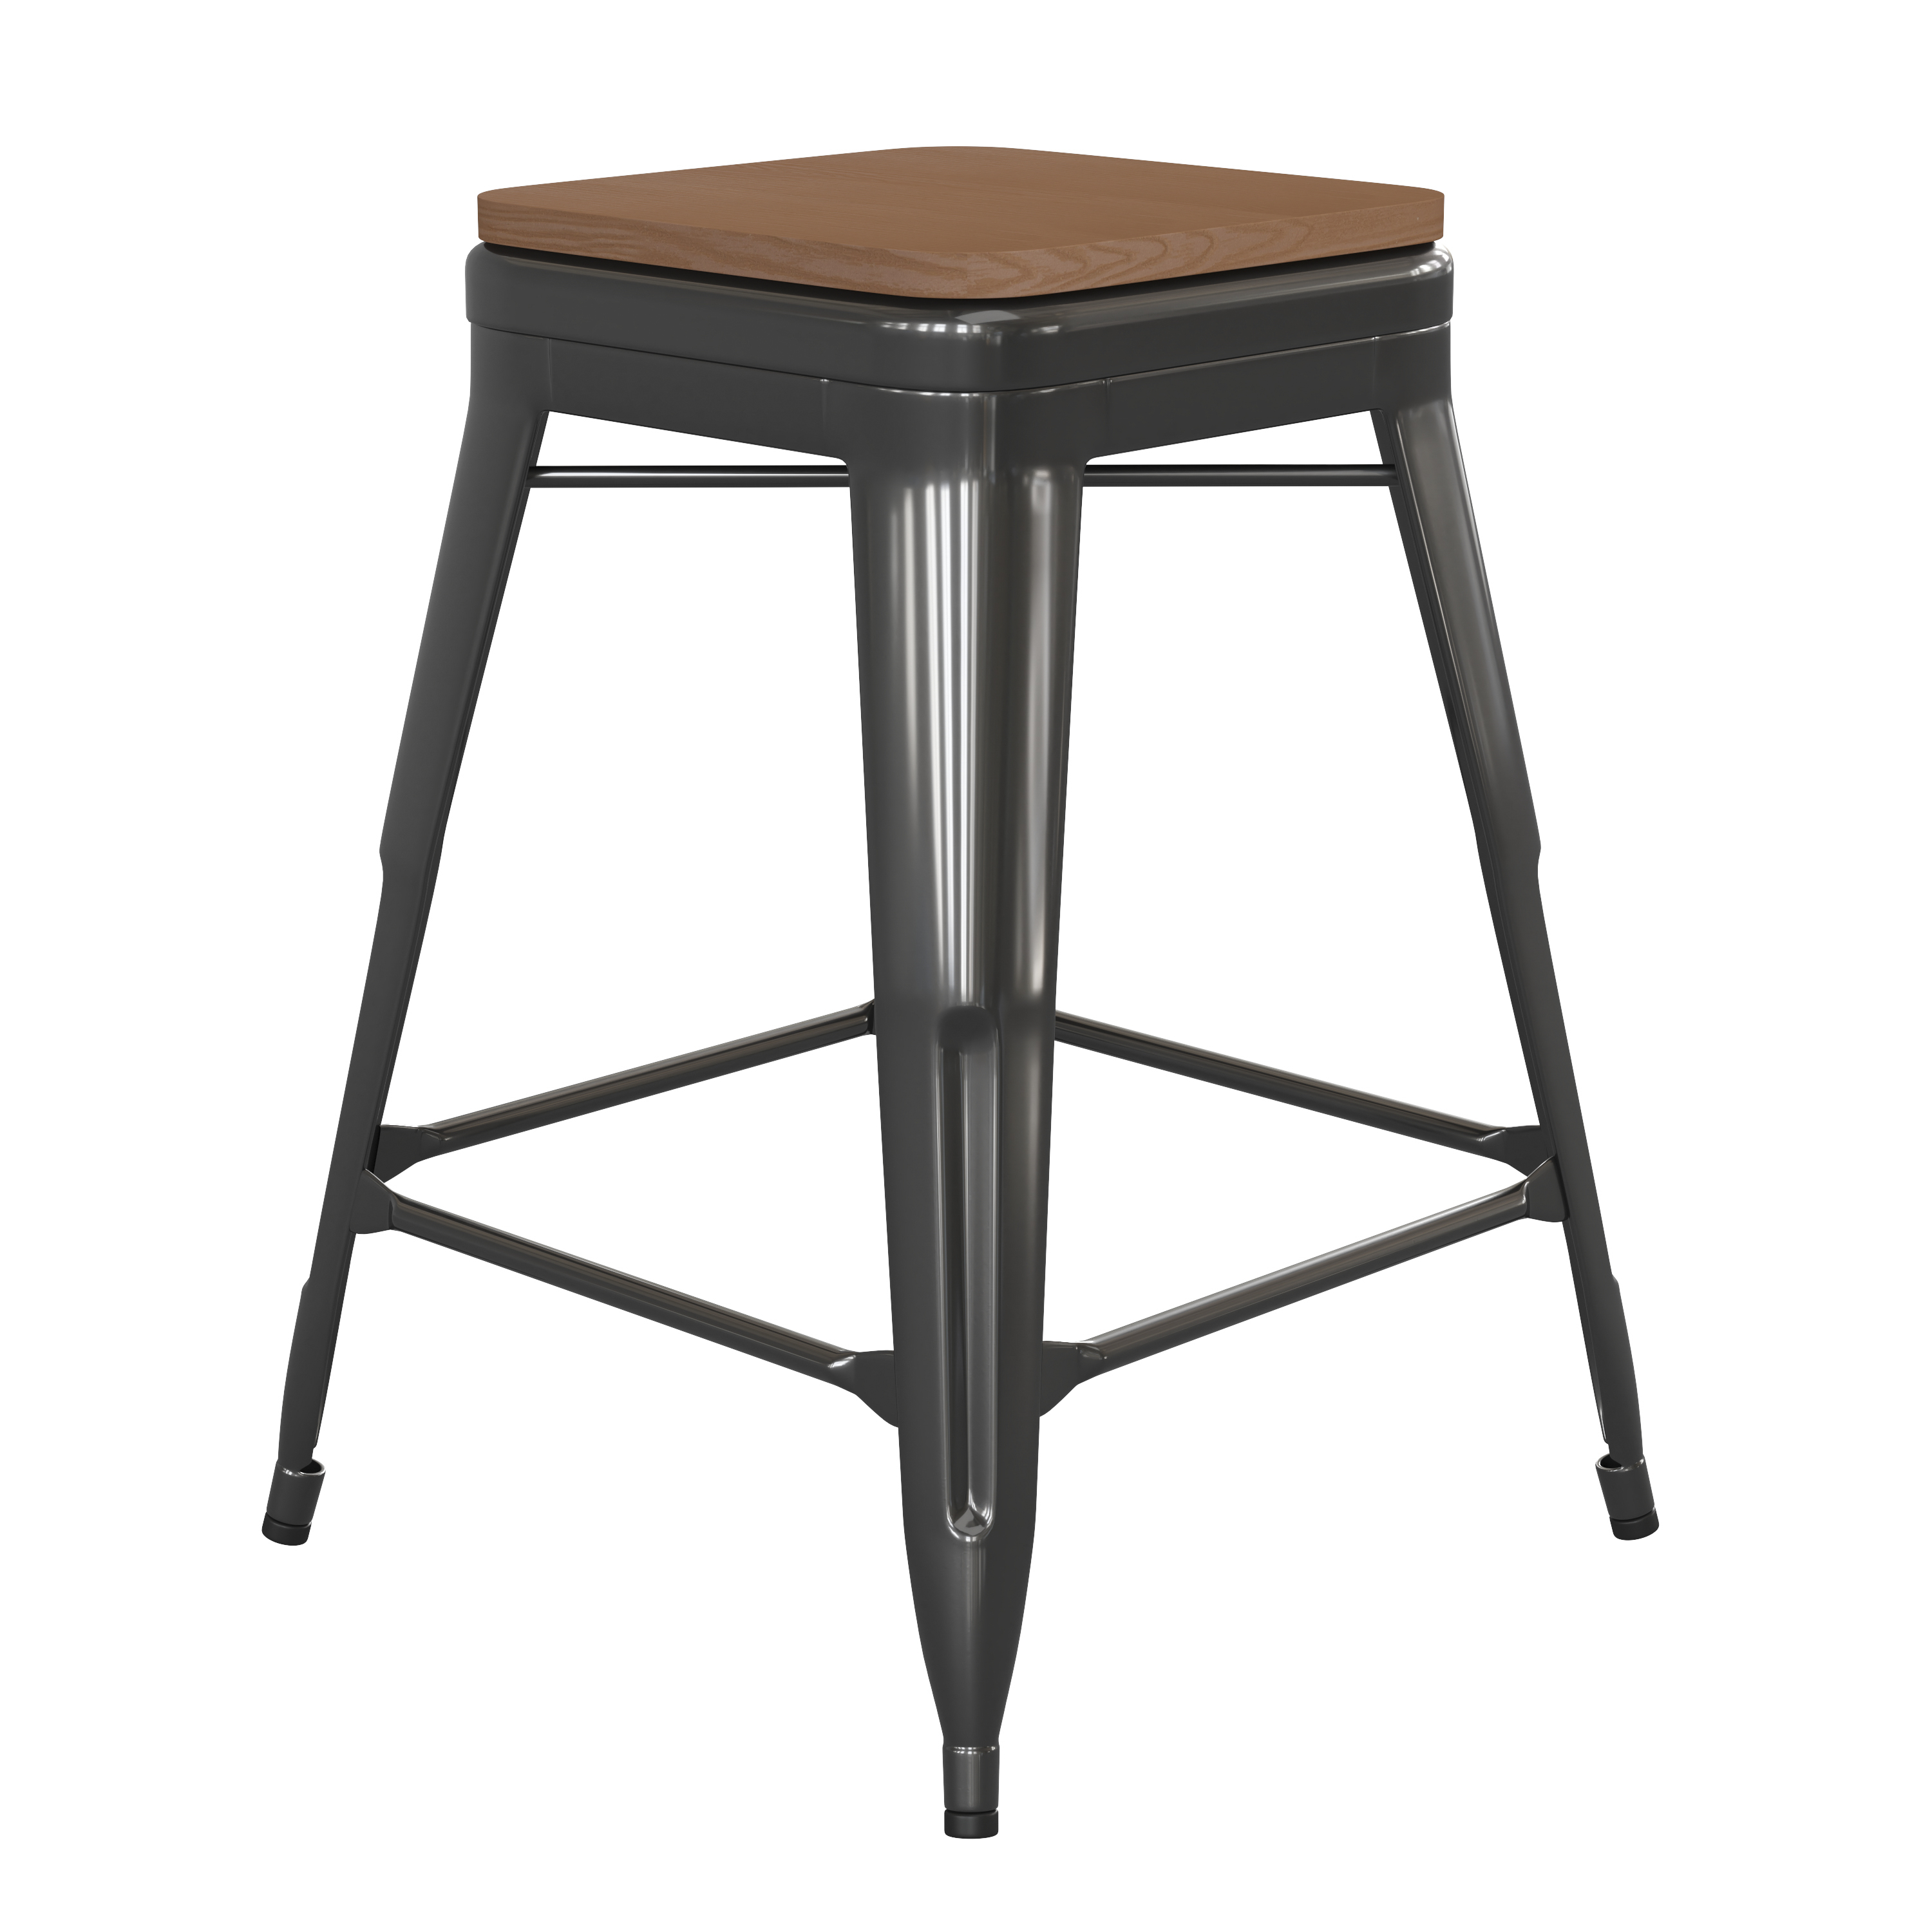 Flash Furniture CH-31320-24-BK-PL2T-GG 24''H Backless Black Metal Indoor/Outdoor Counter Height Stool with Teak Poly Resin Wood Seat